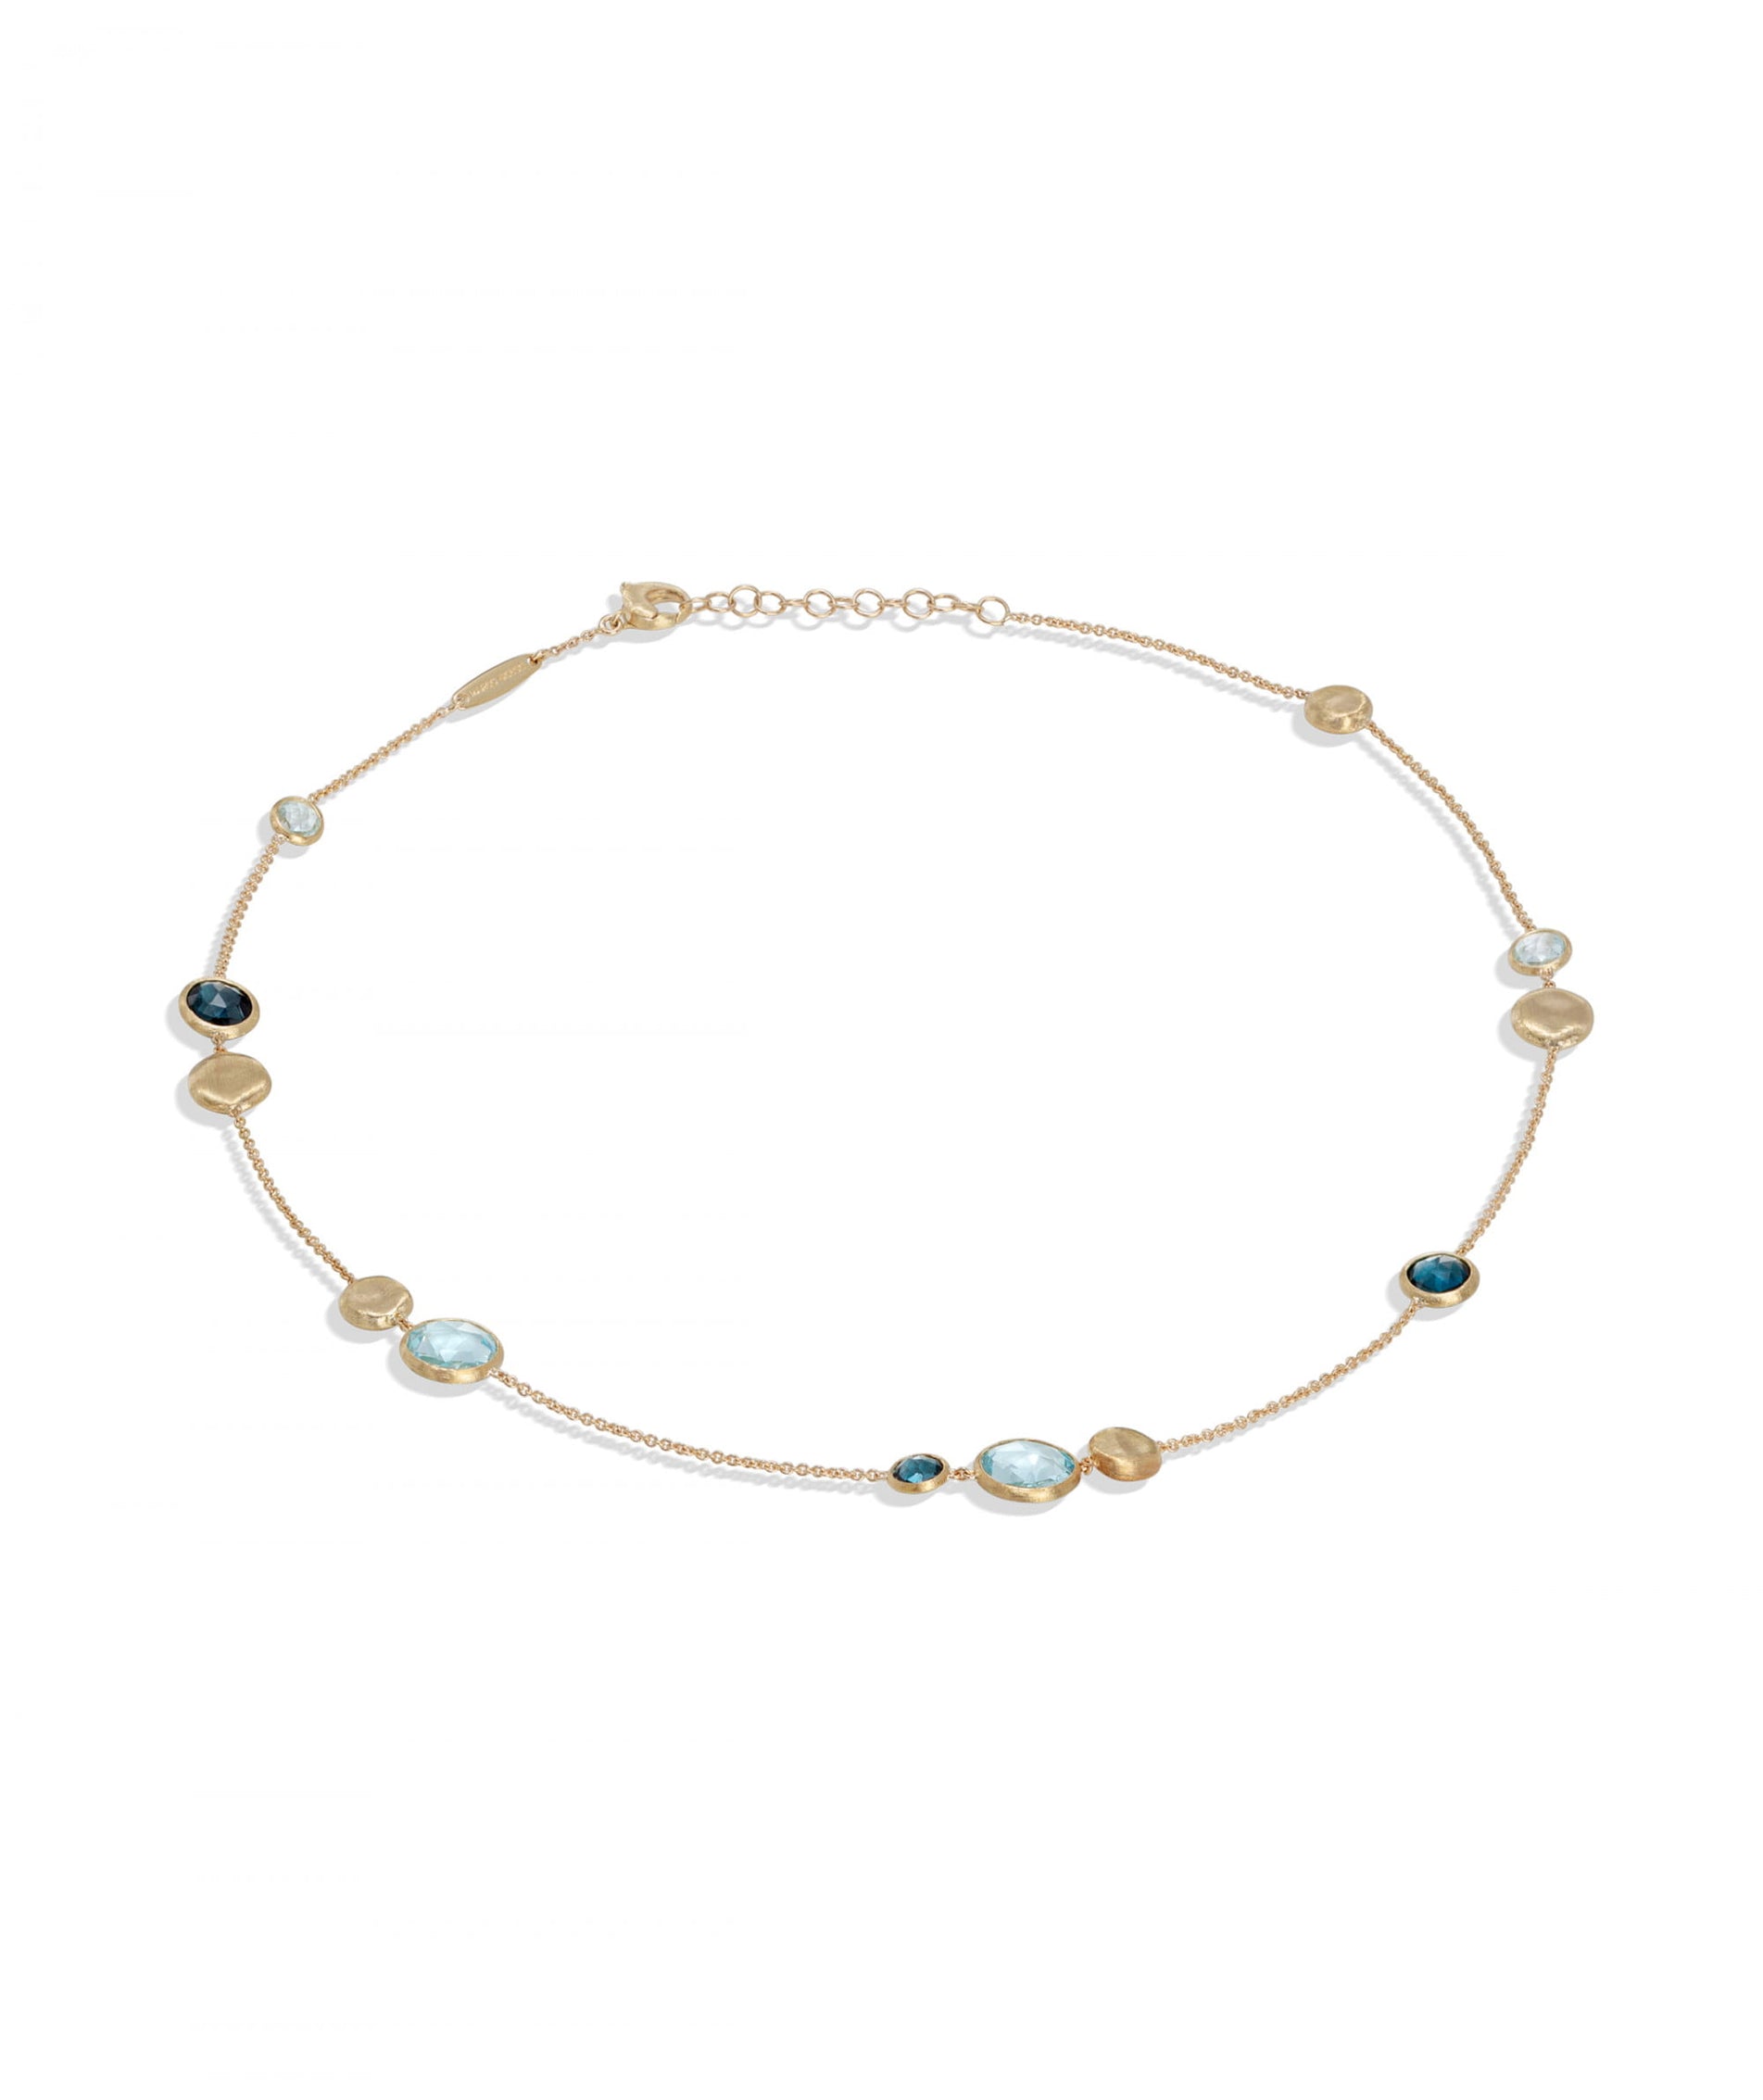 Jaipur Colour Necklace in 18k Yellow Gold with Gemstones Mixed Blues Short - Orsini Jewellers NZ